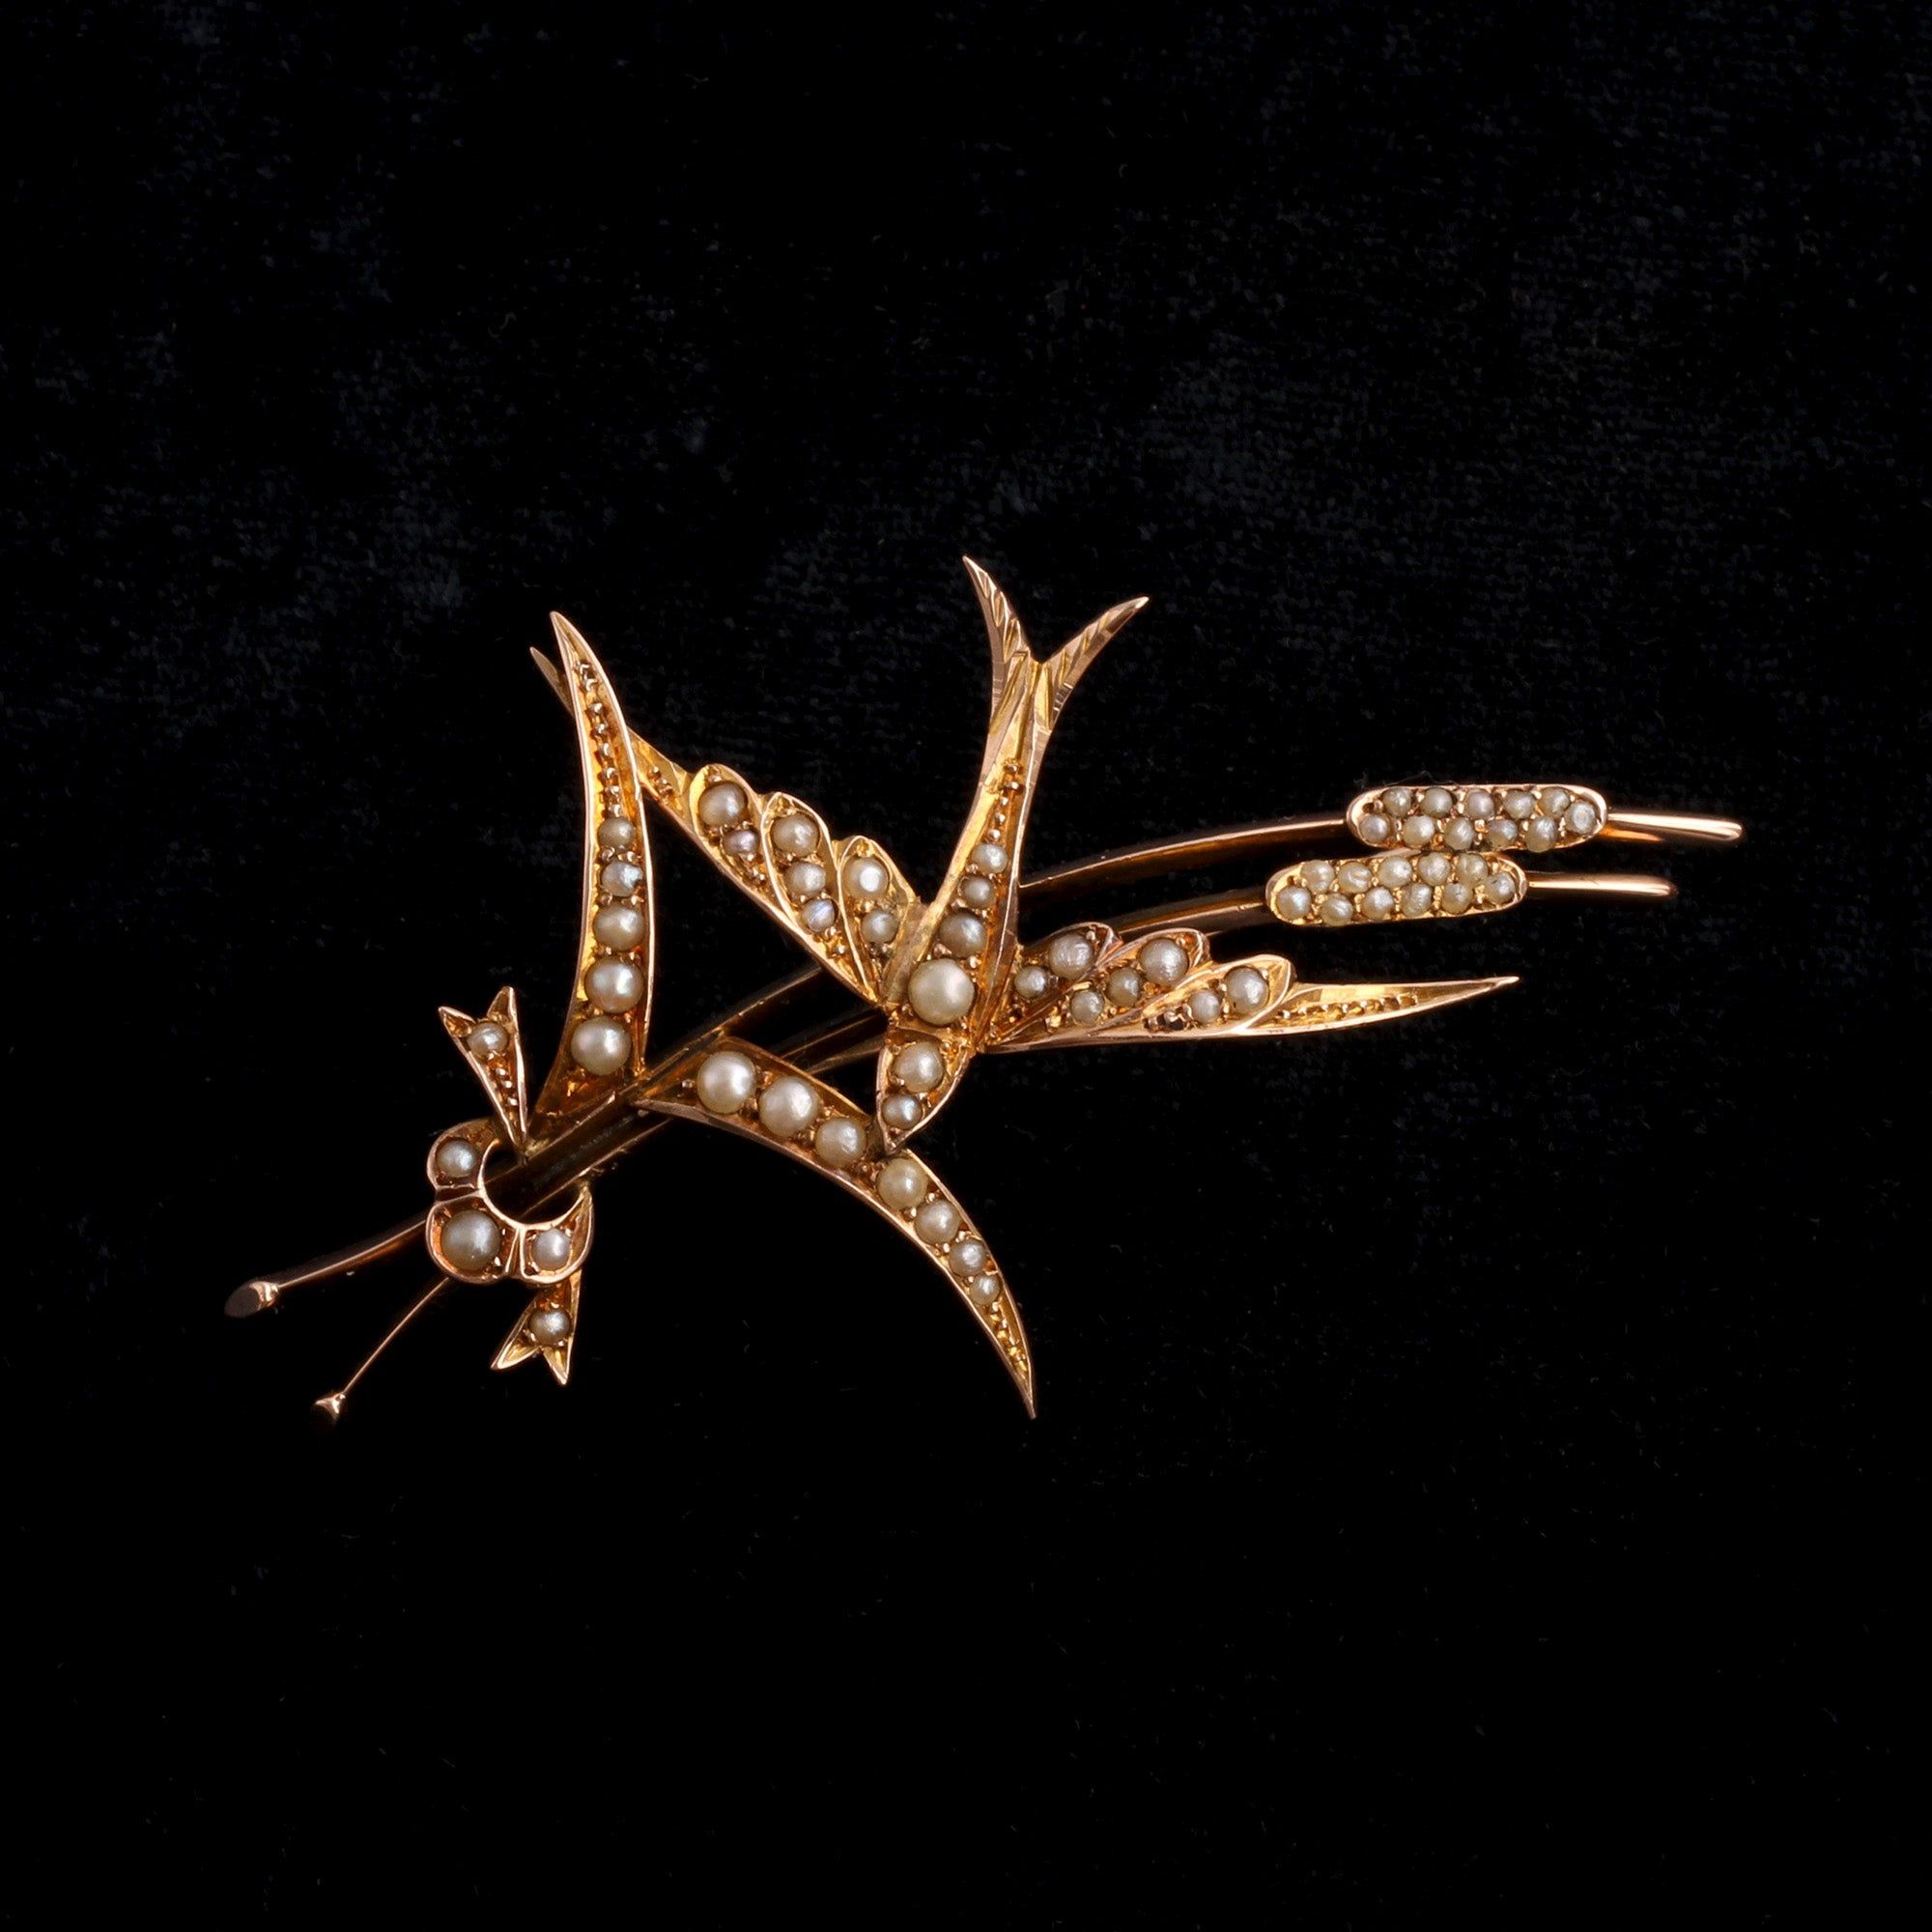 Detail of Victorian Swallow and Bullrush Brooch